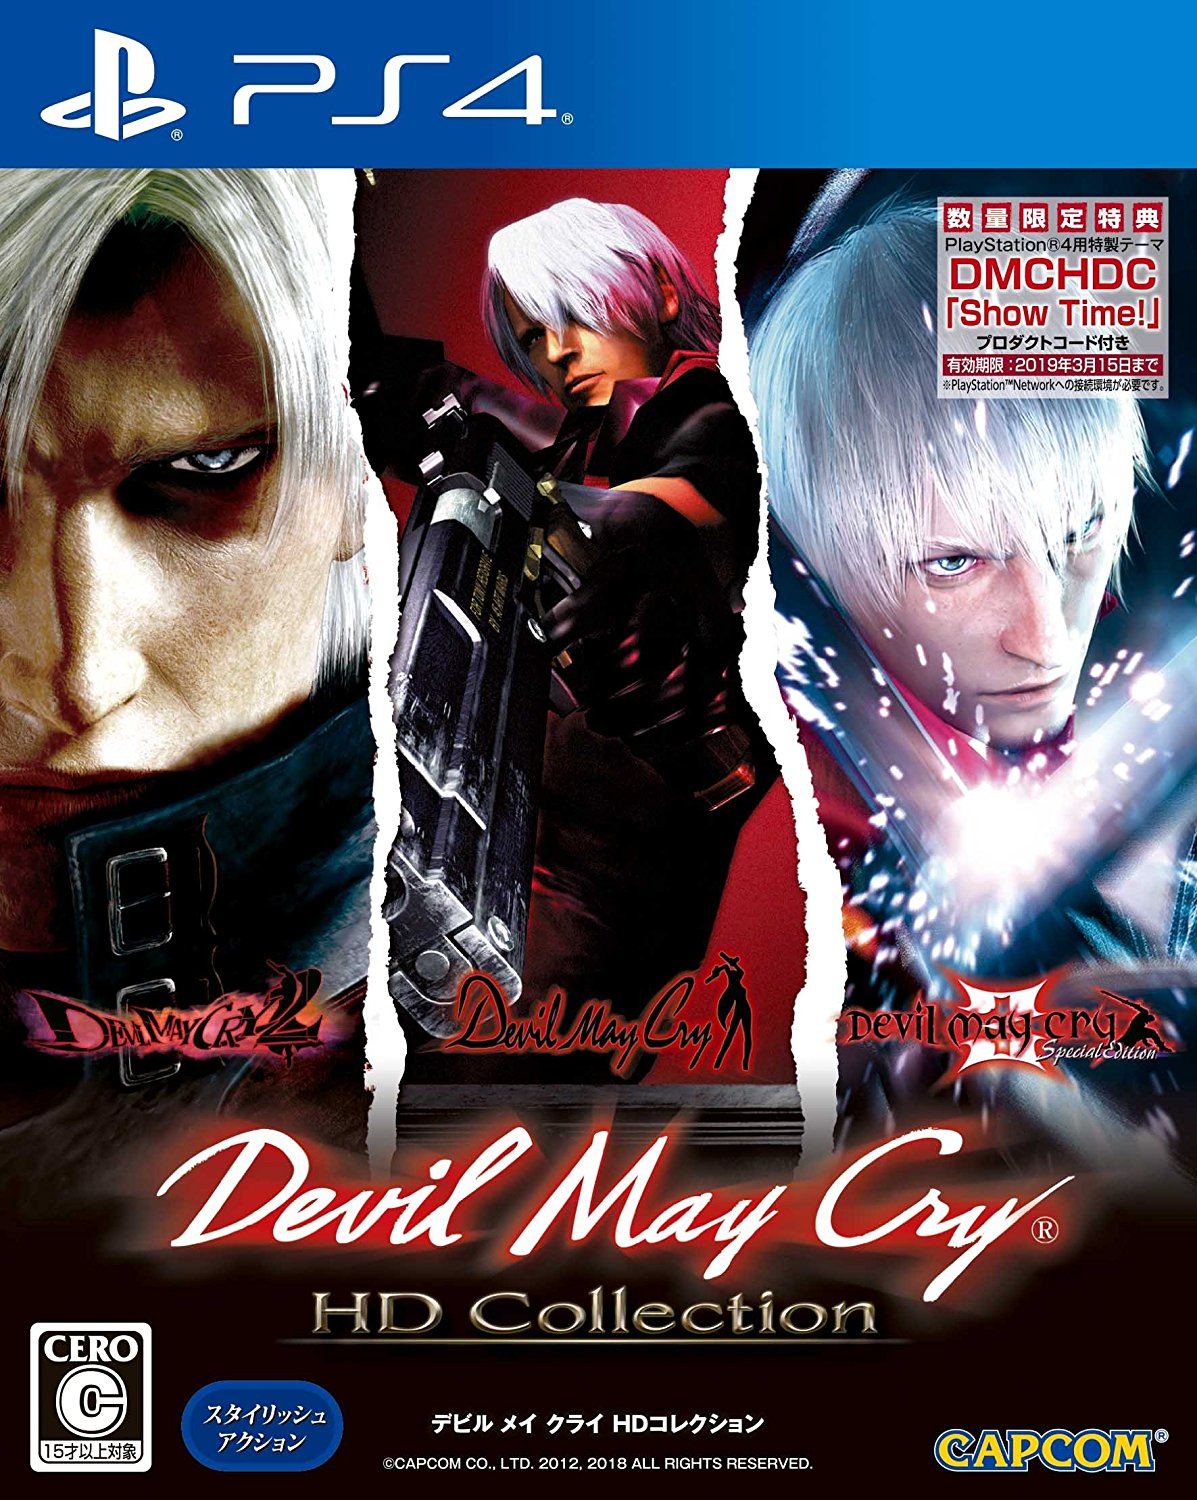 Devil May Cry 4 Special Edition - Vergil PS4 — buy online and